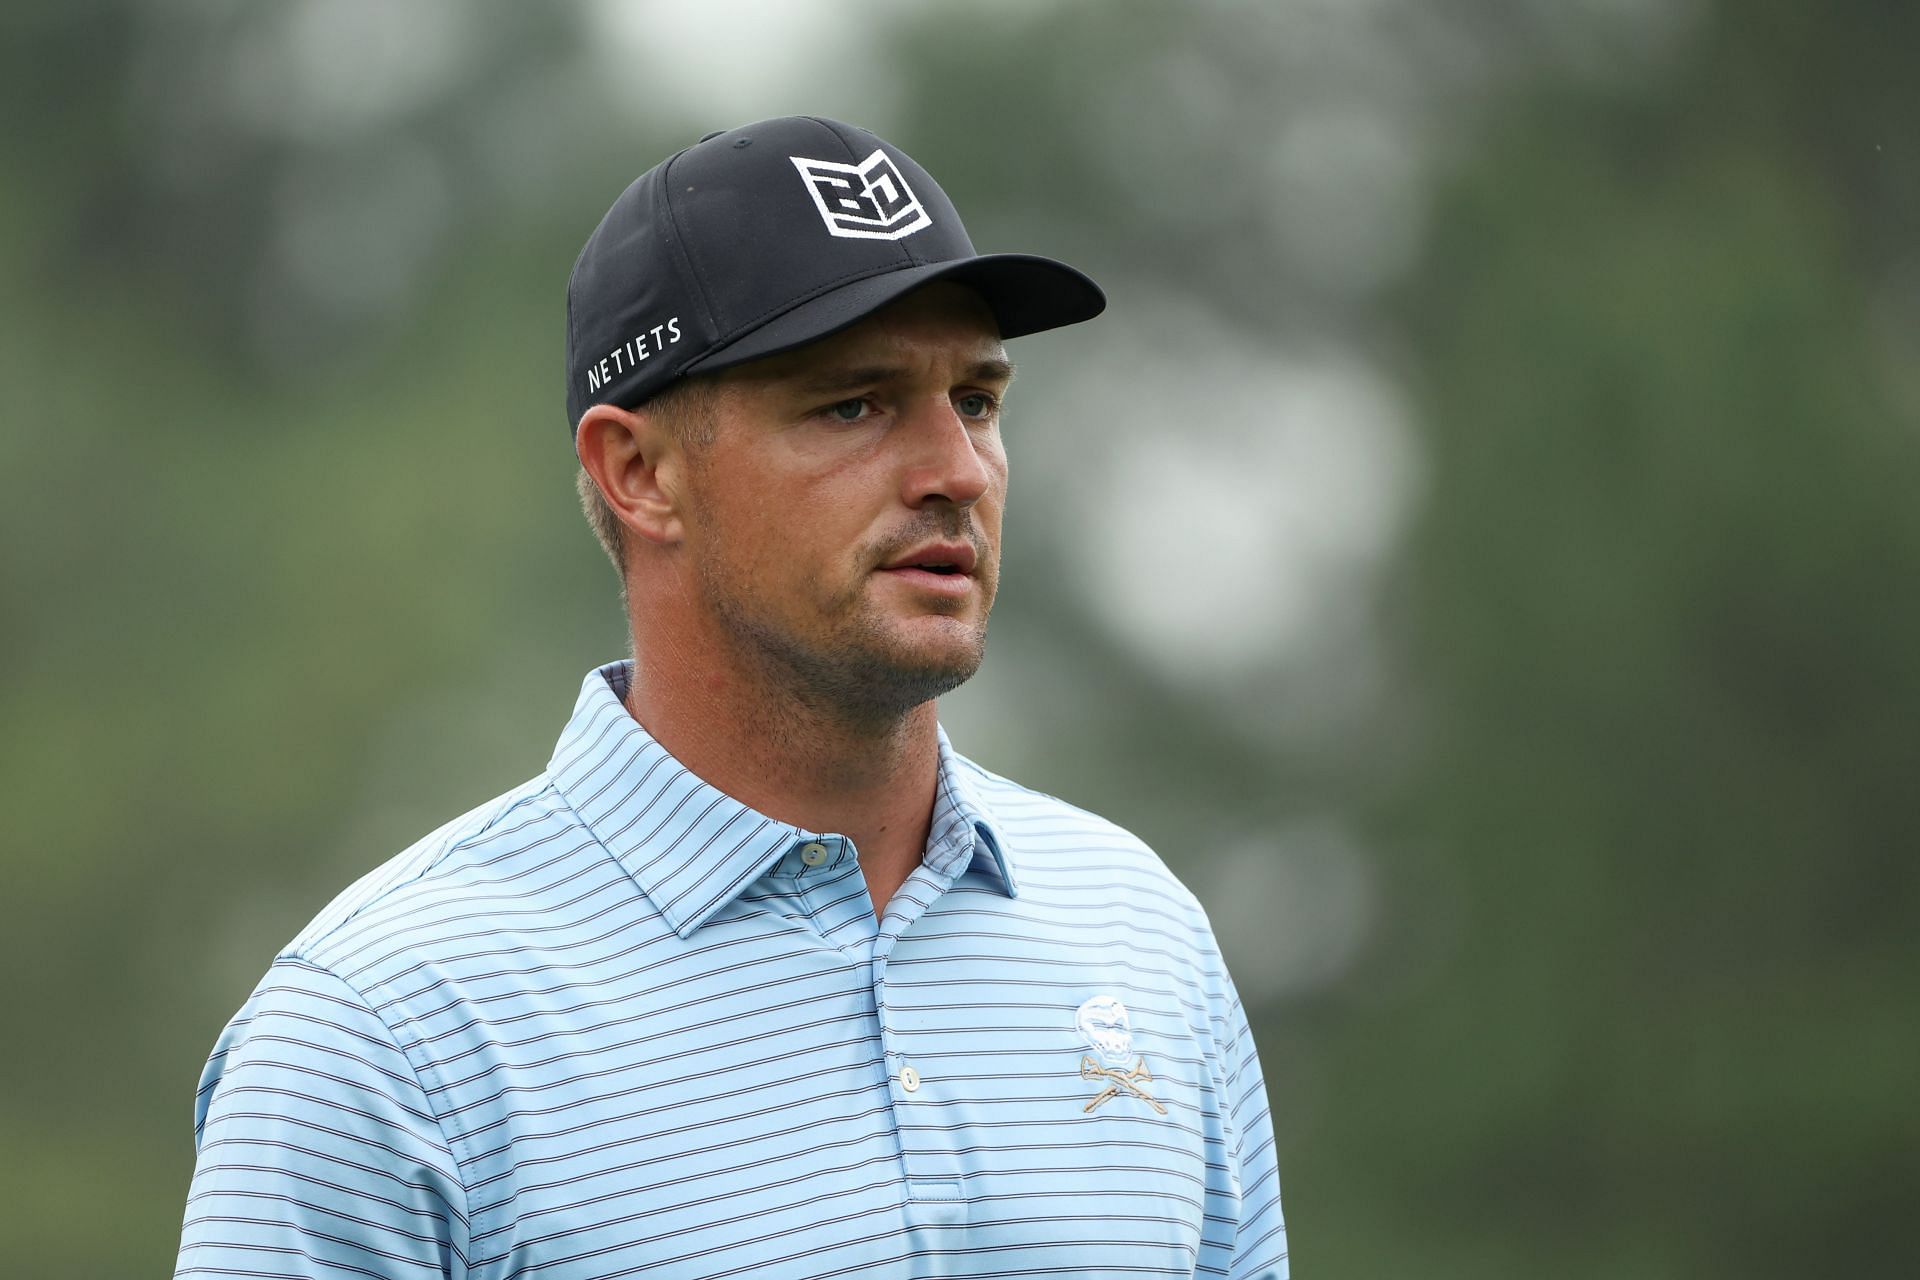 "Dude slimmed way down!!"Fans astounded by Bryson DeChambeau's new